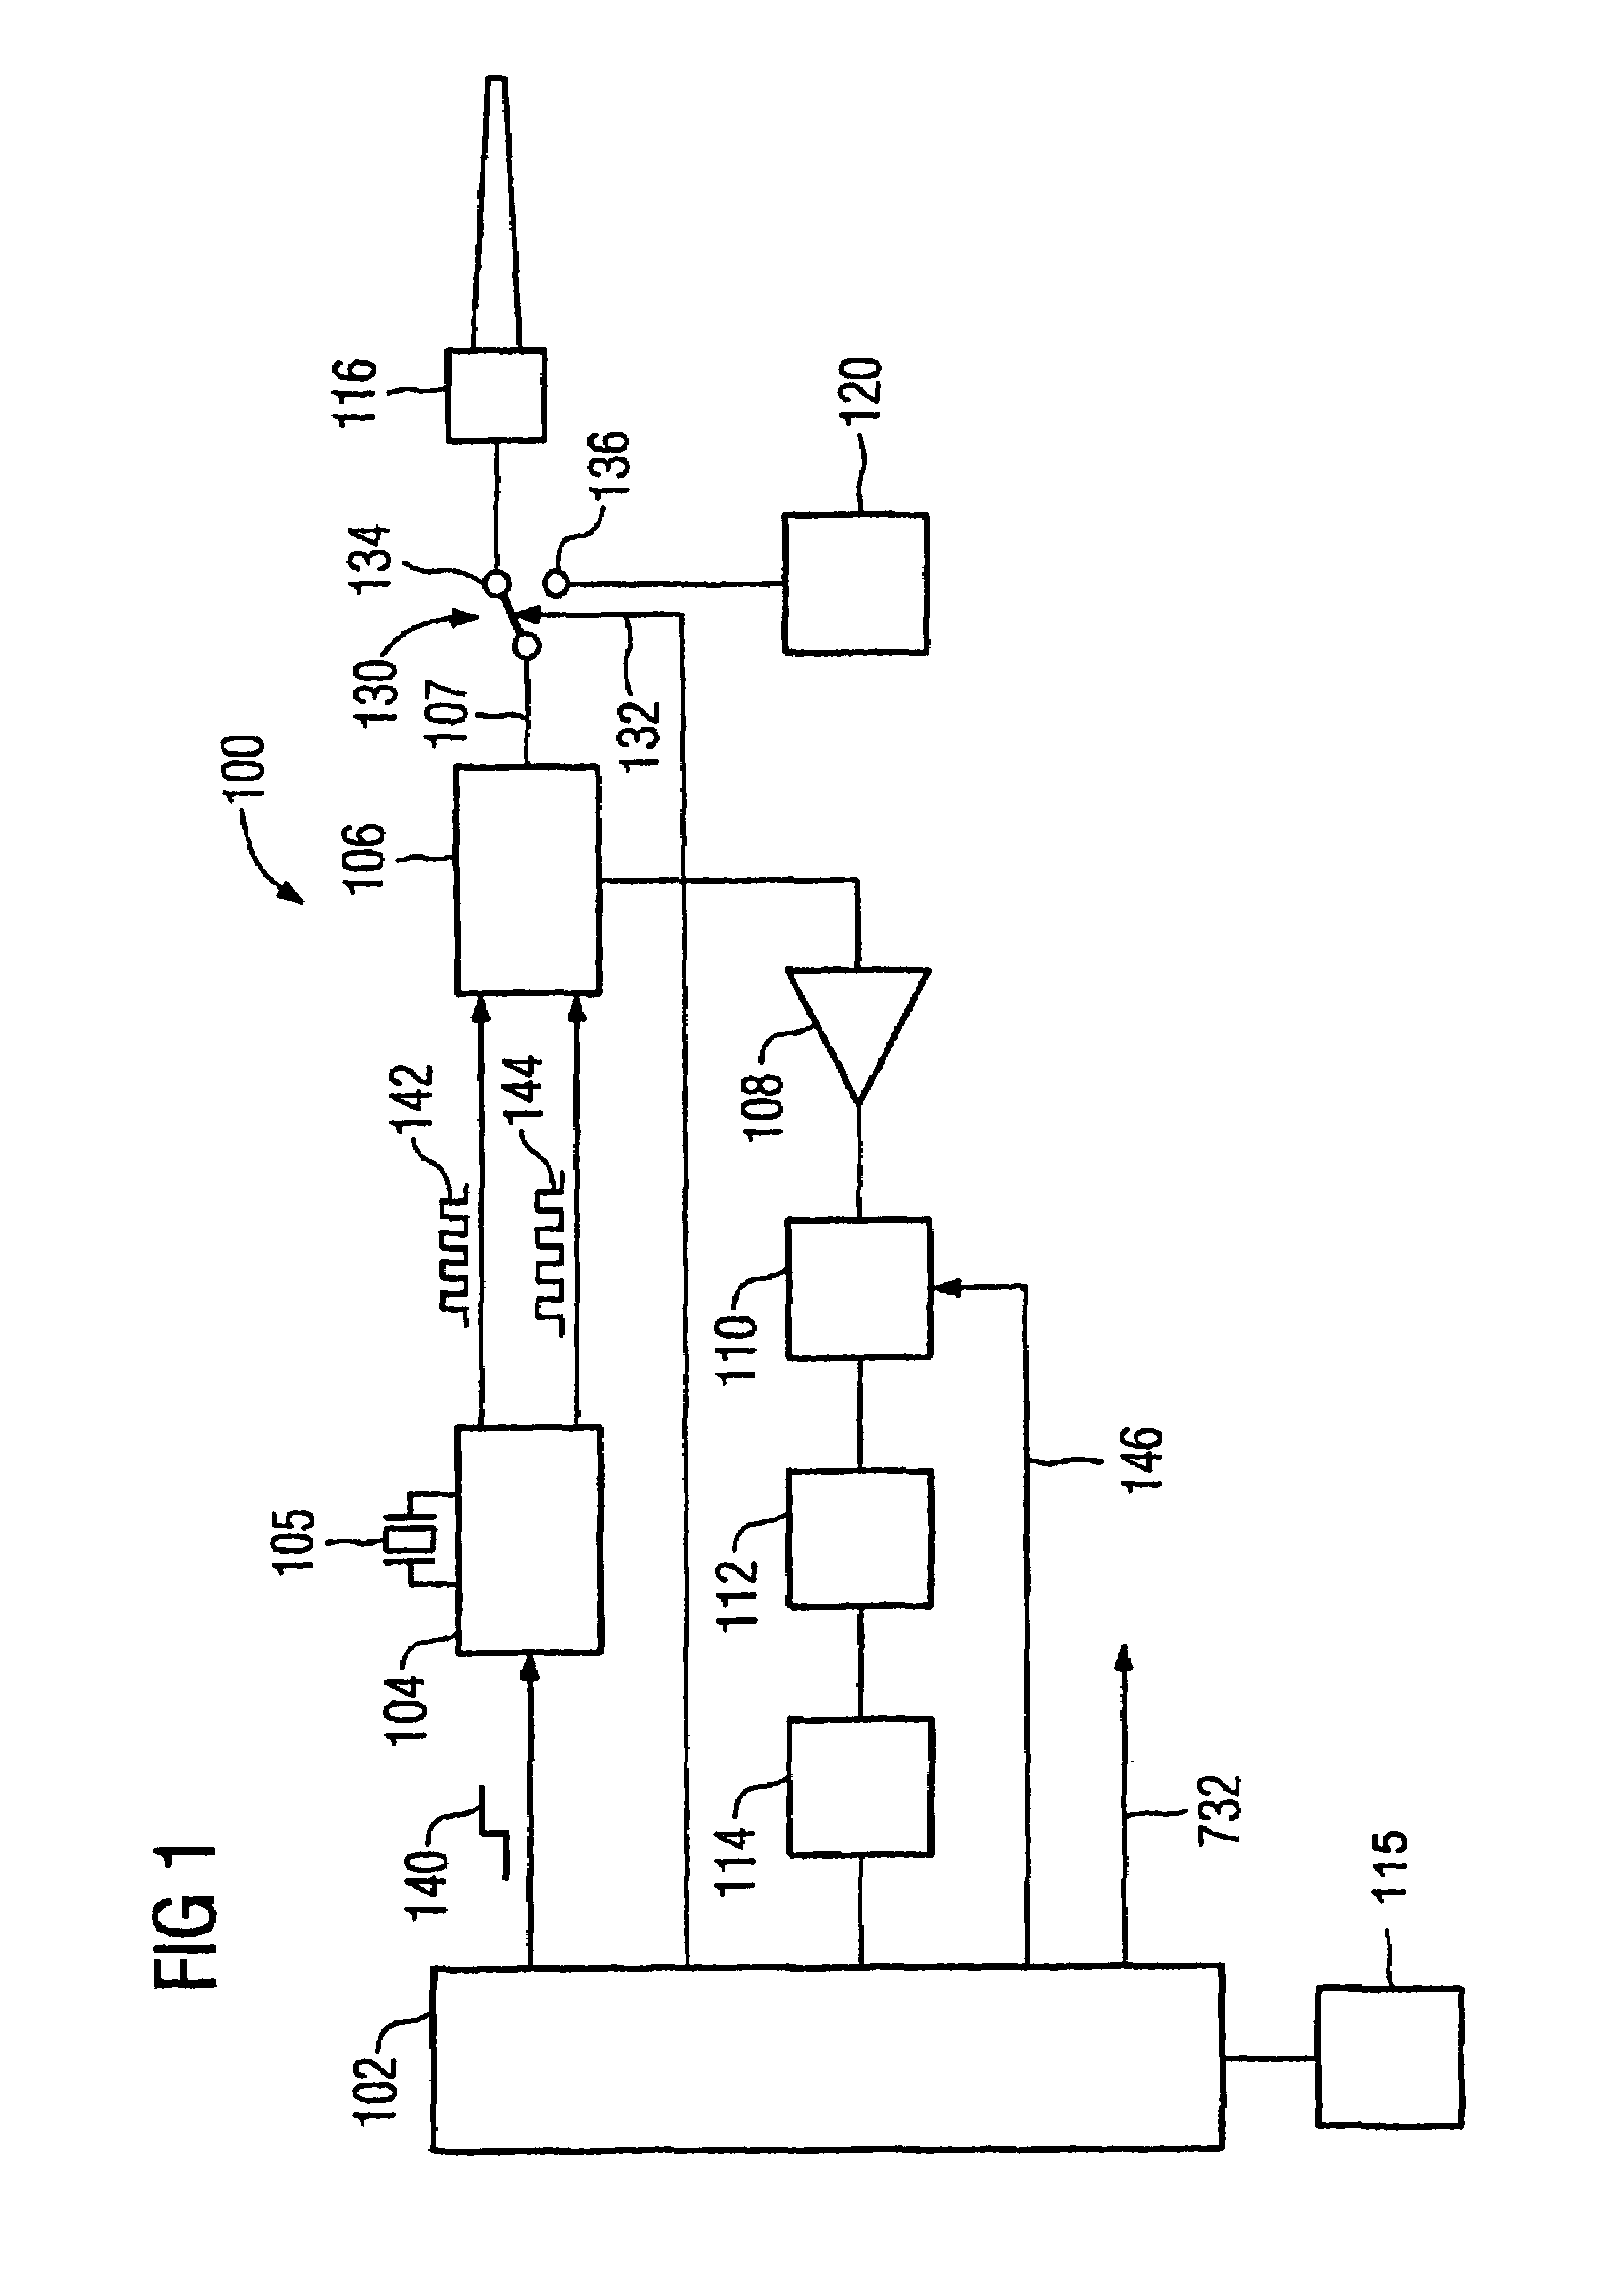 Time-of-flight-ranging system and method for calibrating such a system